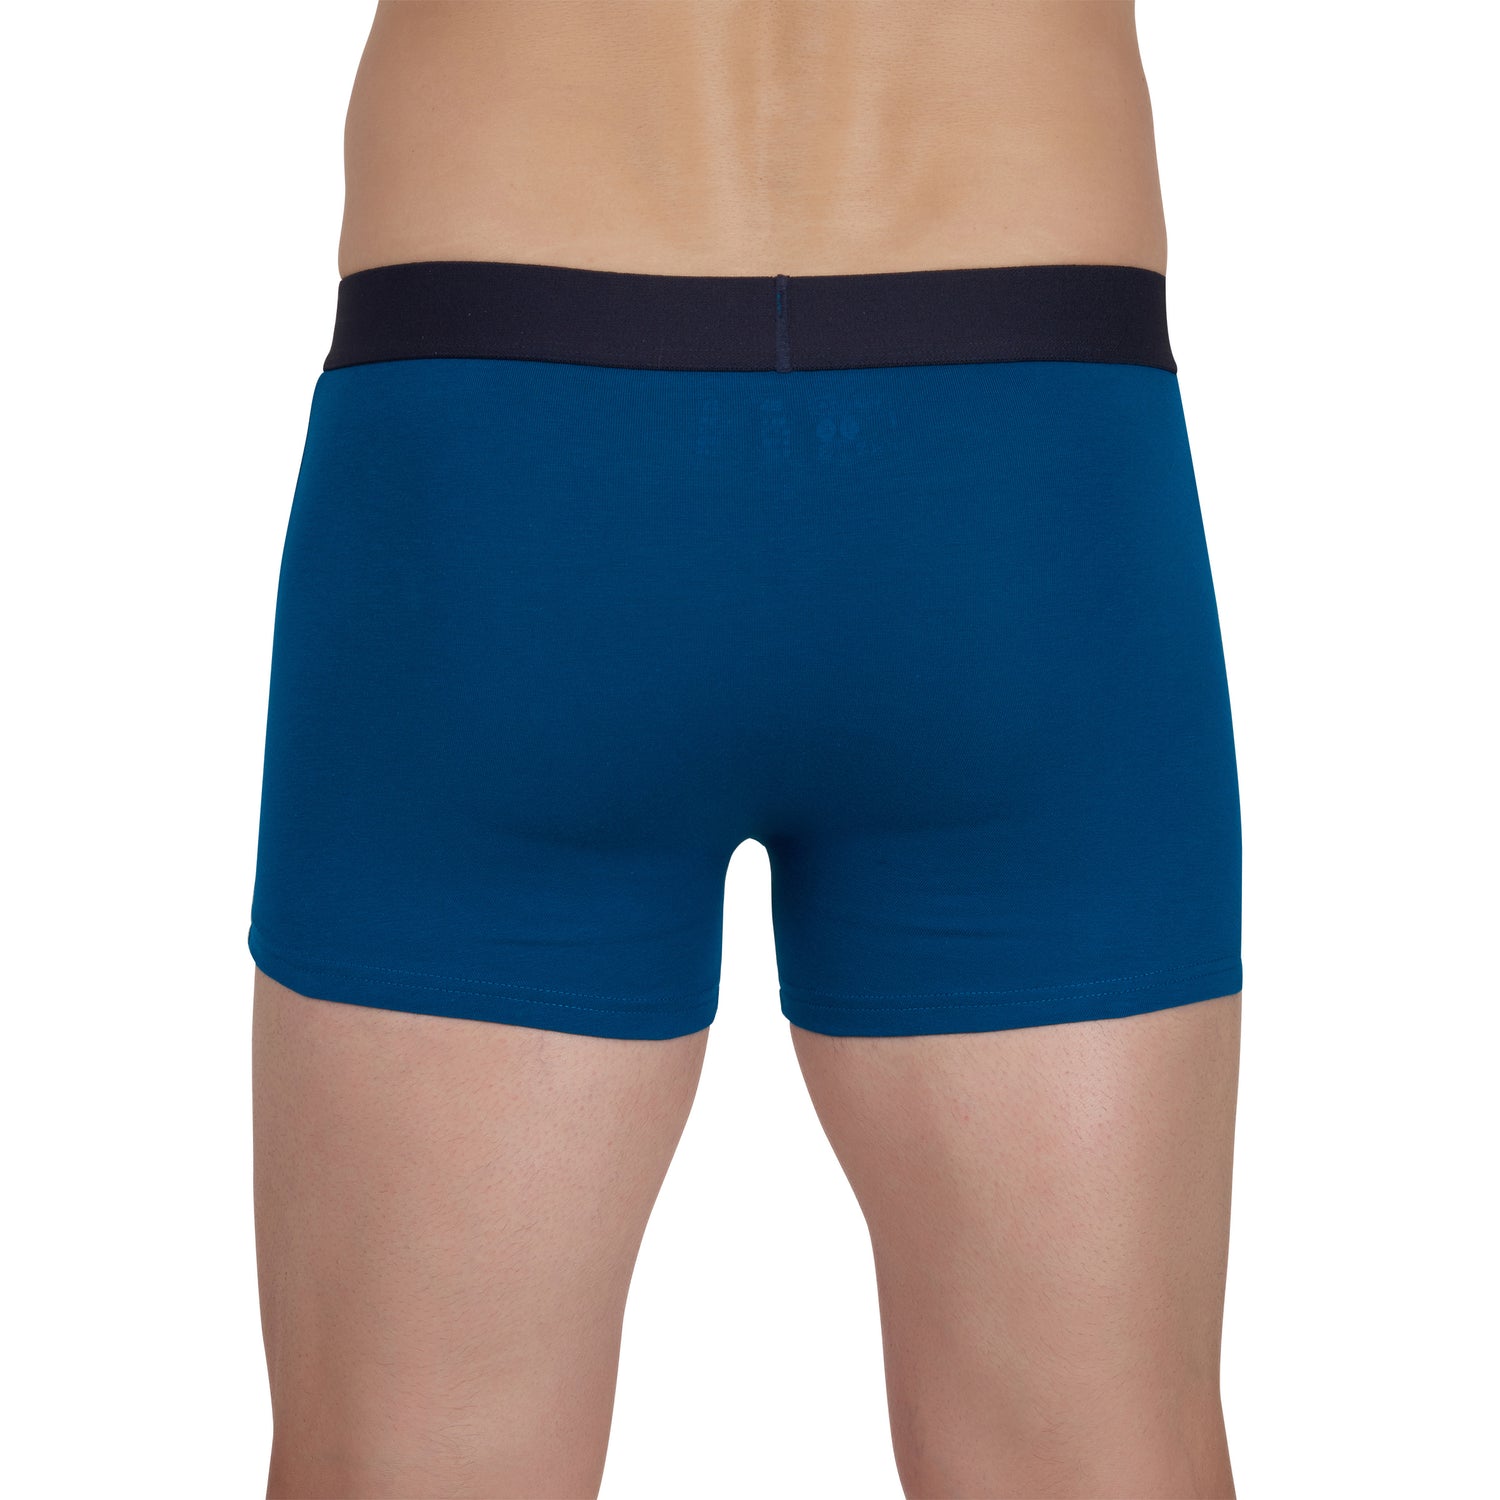 Pack of 2 Shorties in Petrol Blue and Navy Stretch Organic Cotton